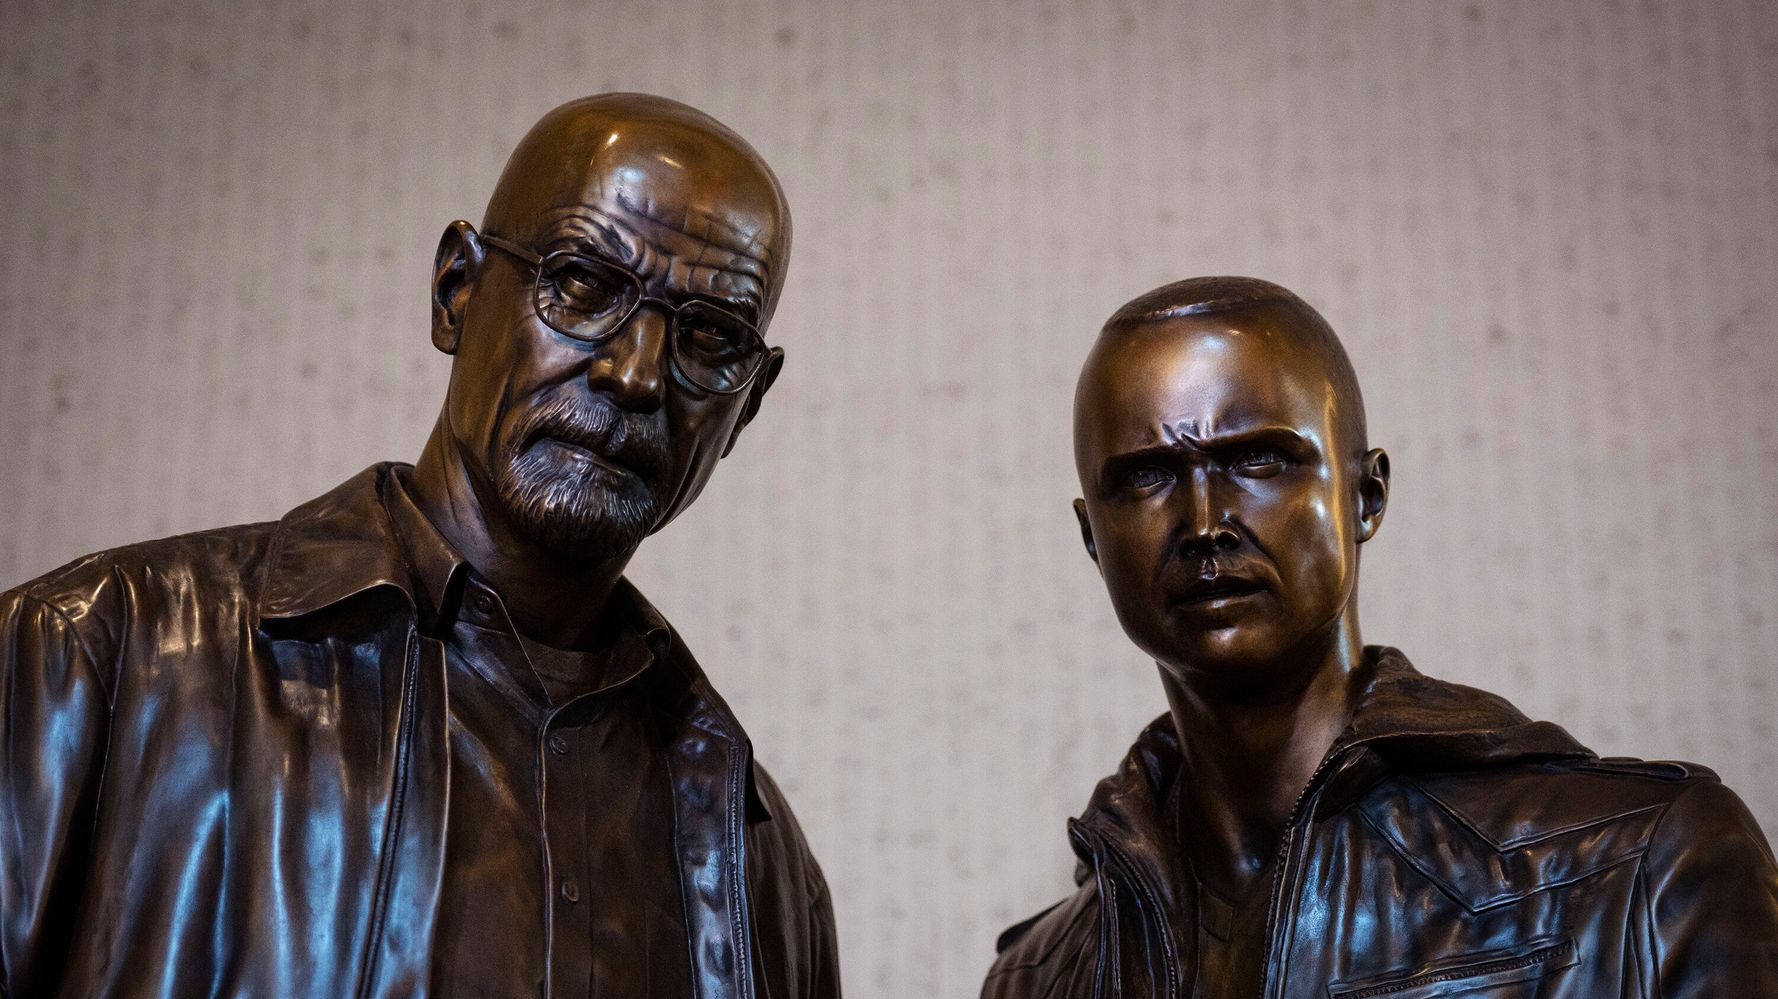 The bronze Statues Of Walter White And Jesse pinkman